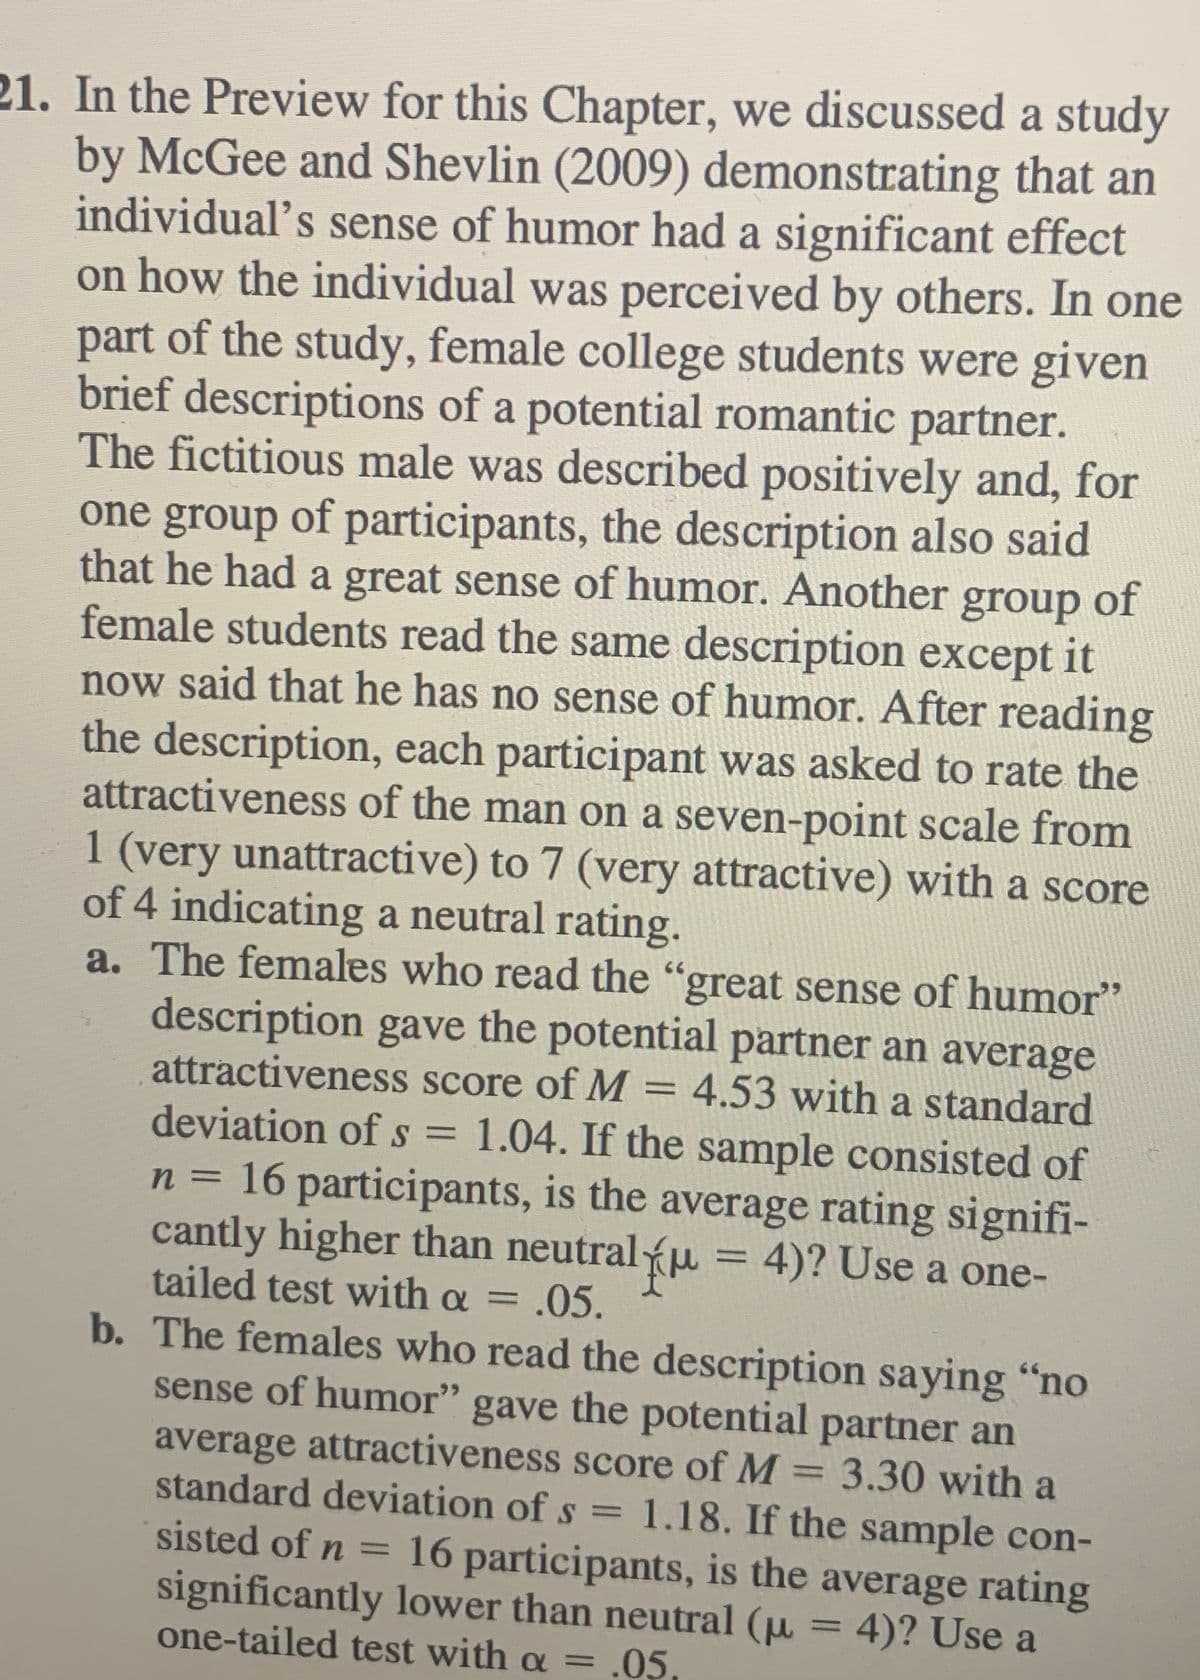 21. In the Preview for this Chapter, we discussed a study
by McGee and Shevlin (2009) demonstrating that an
individual's sense of humor had a significant effect
on how the individual was perceived by others. In one
part of the study, female college students were given
brief descriptions of a potential romantic partner.
The fictitious male was described positively and, for
one group of participants, the description also said
that he had a great sense of humor. Another group of
female students read the same description except it
now said that he has no sense of humor. After reading
the description, each participant was asked to rate the
attractiveness of the man on a seven-point scale from
1 (very unattractive) to 7 (very attractive) with a score
of 4 indicating a neutral rating.
a. The females who read the "great sense of humor"
description gave the potential partner an average
attractiveness score of M = 4.53 with a standard
%3D
deviation ofs =
1.04. If the sample consisted of
n = 16 participants, is the average rating signifi-
cantly higher than neutralu = 4)? Use a one-
tailed test with a = .05.
%3D
b. The females who read the description saying "no
sense of humor" gave the potential partner an
average attractiveness score of M 3.30 with a
standard deviation of s = 1.18. If the sample con-
%3D
sisted of n =
16 participants, is the average rating
significantly lower than neutral (µ = 4)? Use a
one-tailed test with a = .05,
%3D
